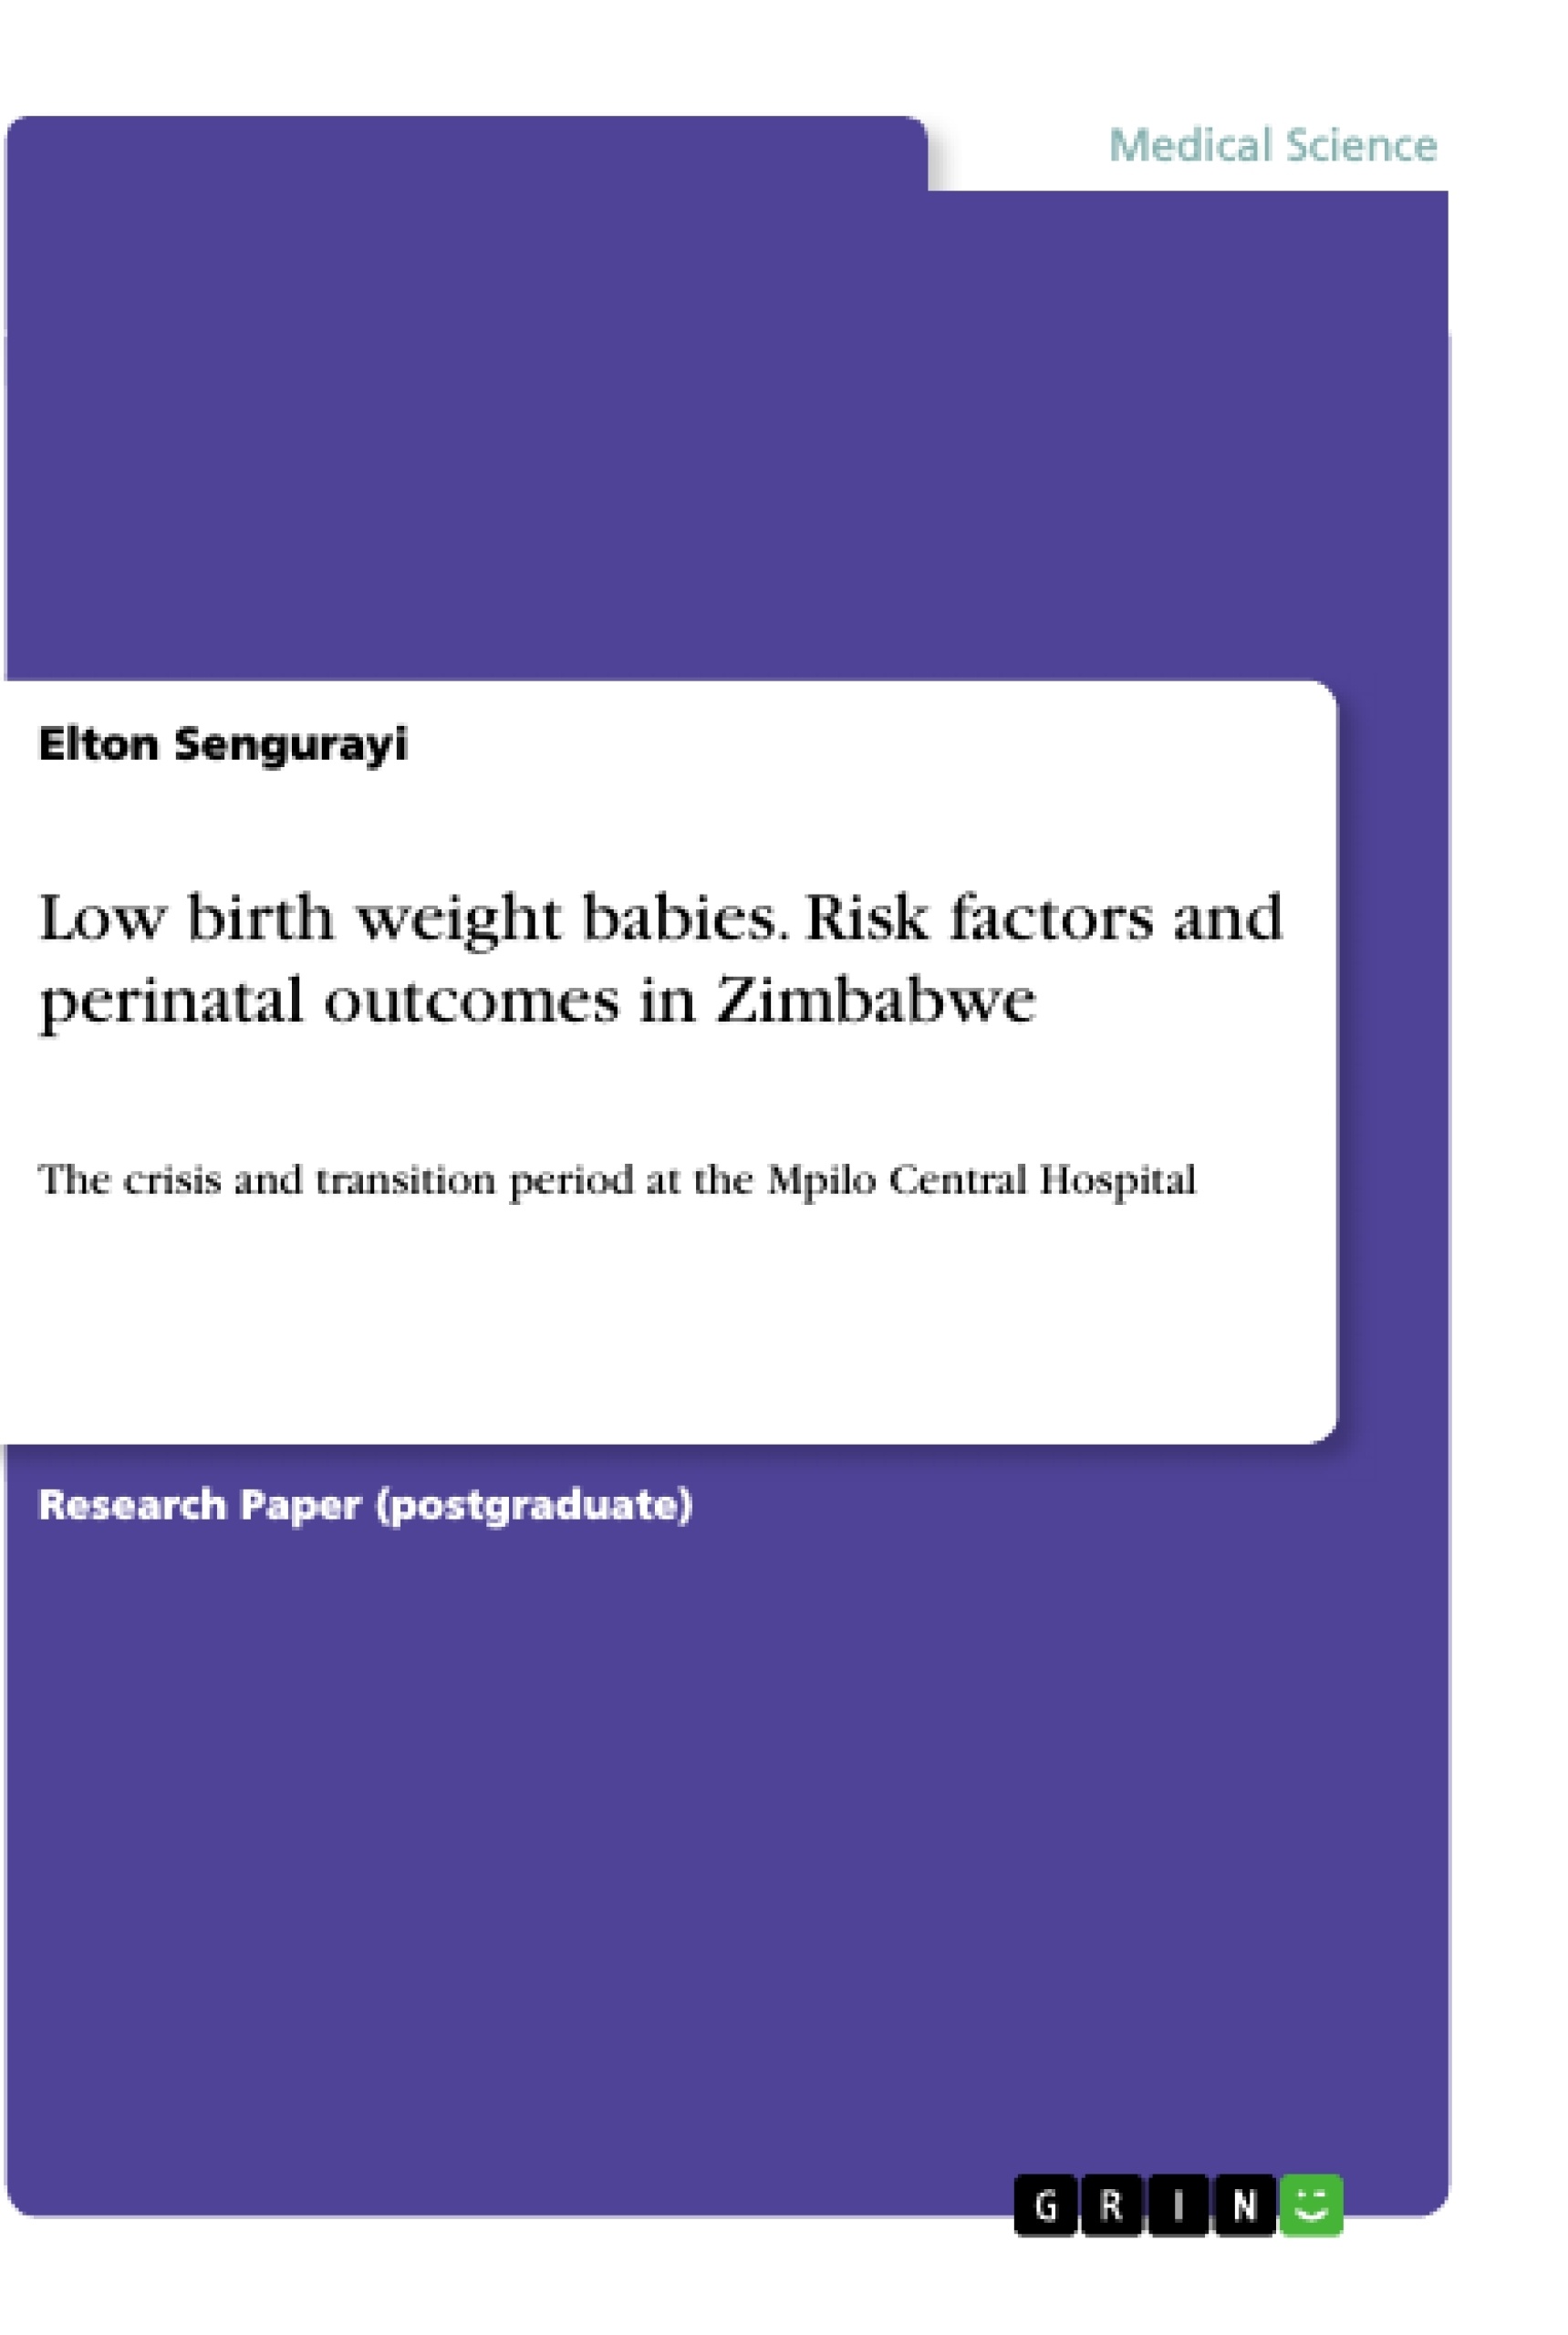 Title: Low birth weight babies. Risk factors and perinatal outcomes in Zimbabwe